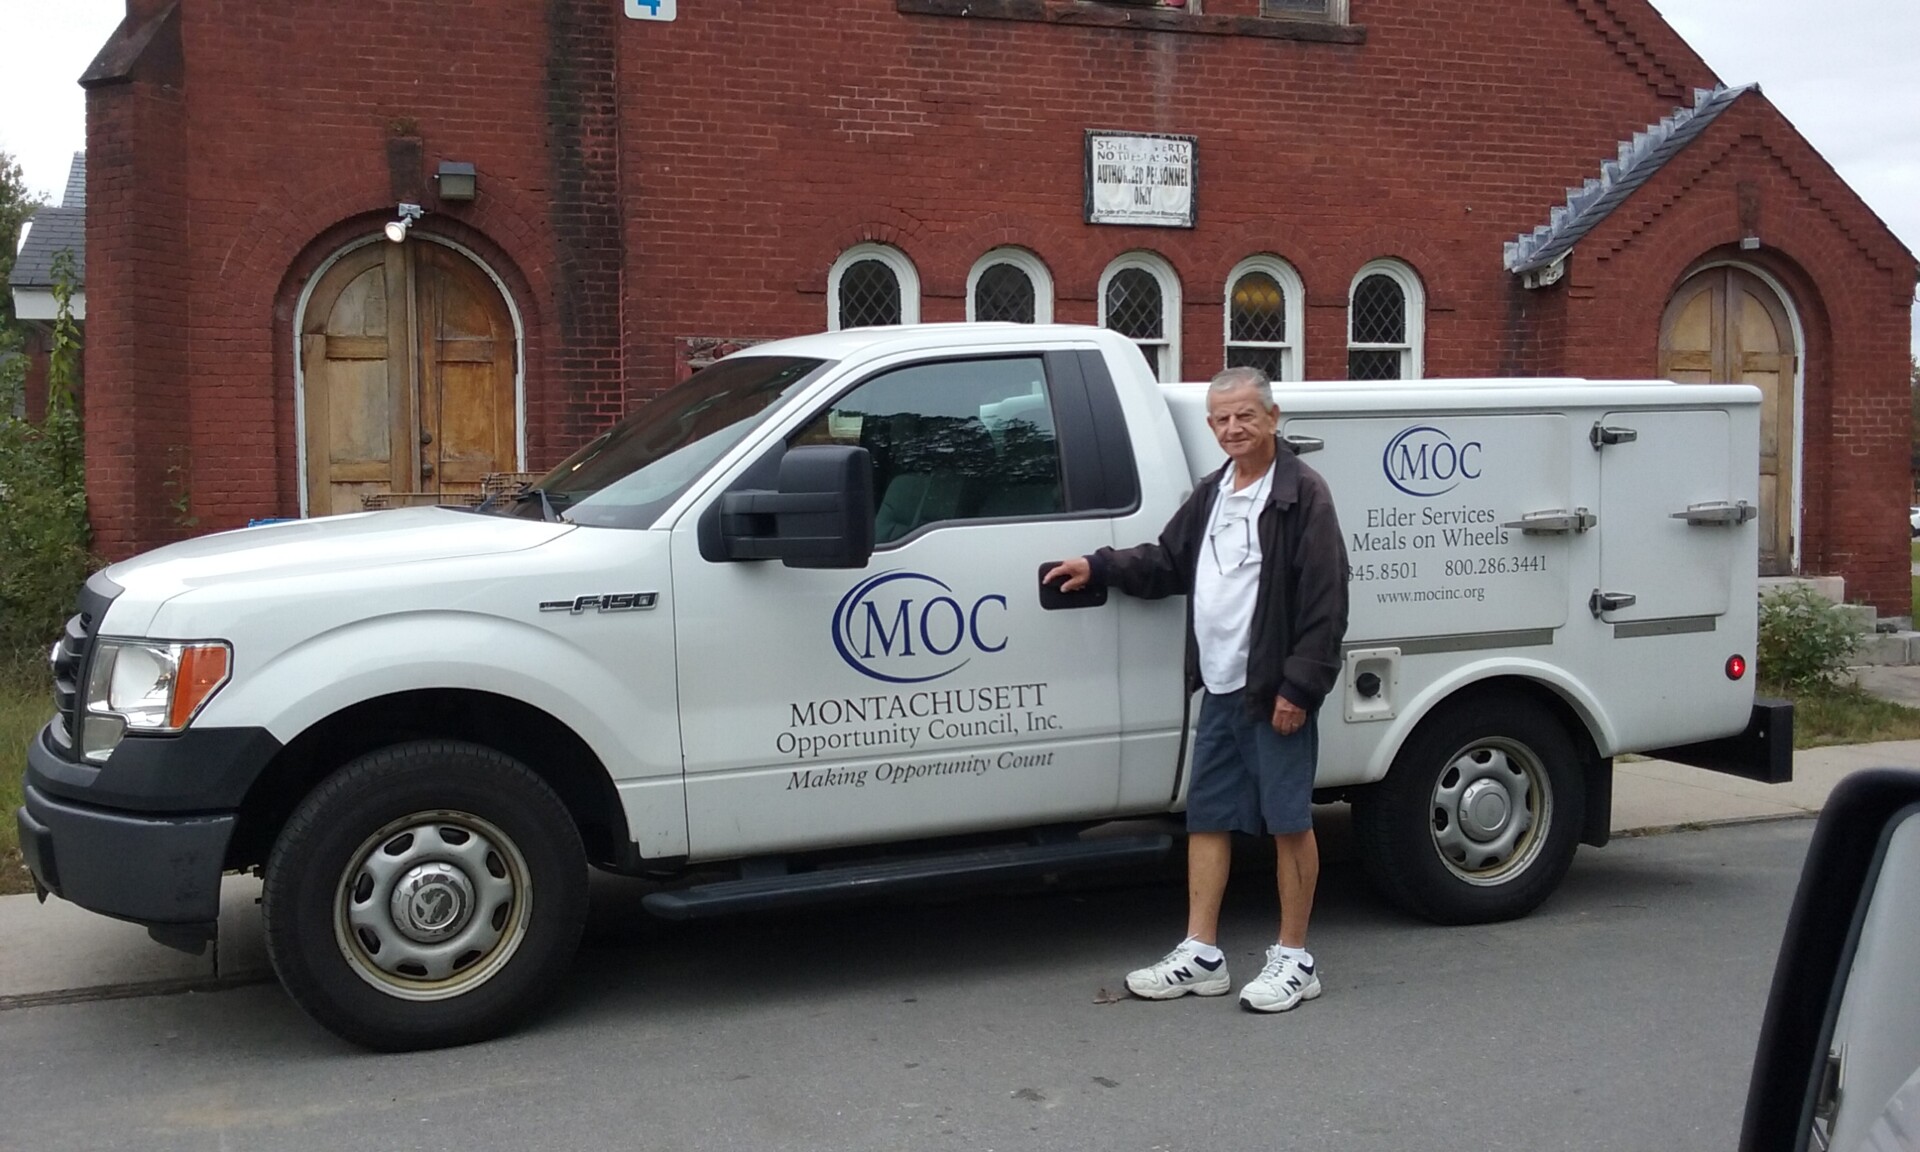 Montachusett Opportunity Council Meals on Wheels Truck with Driver